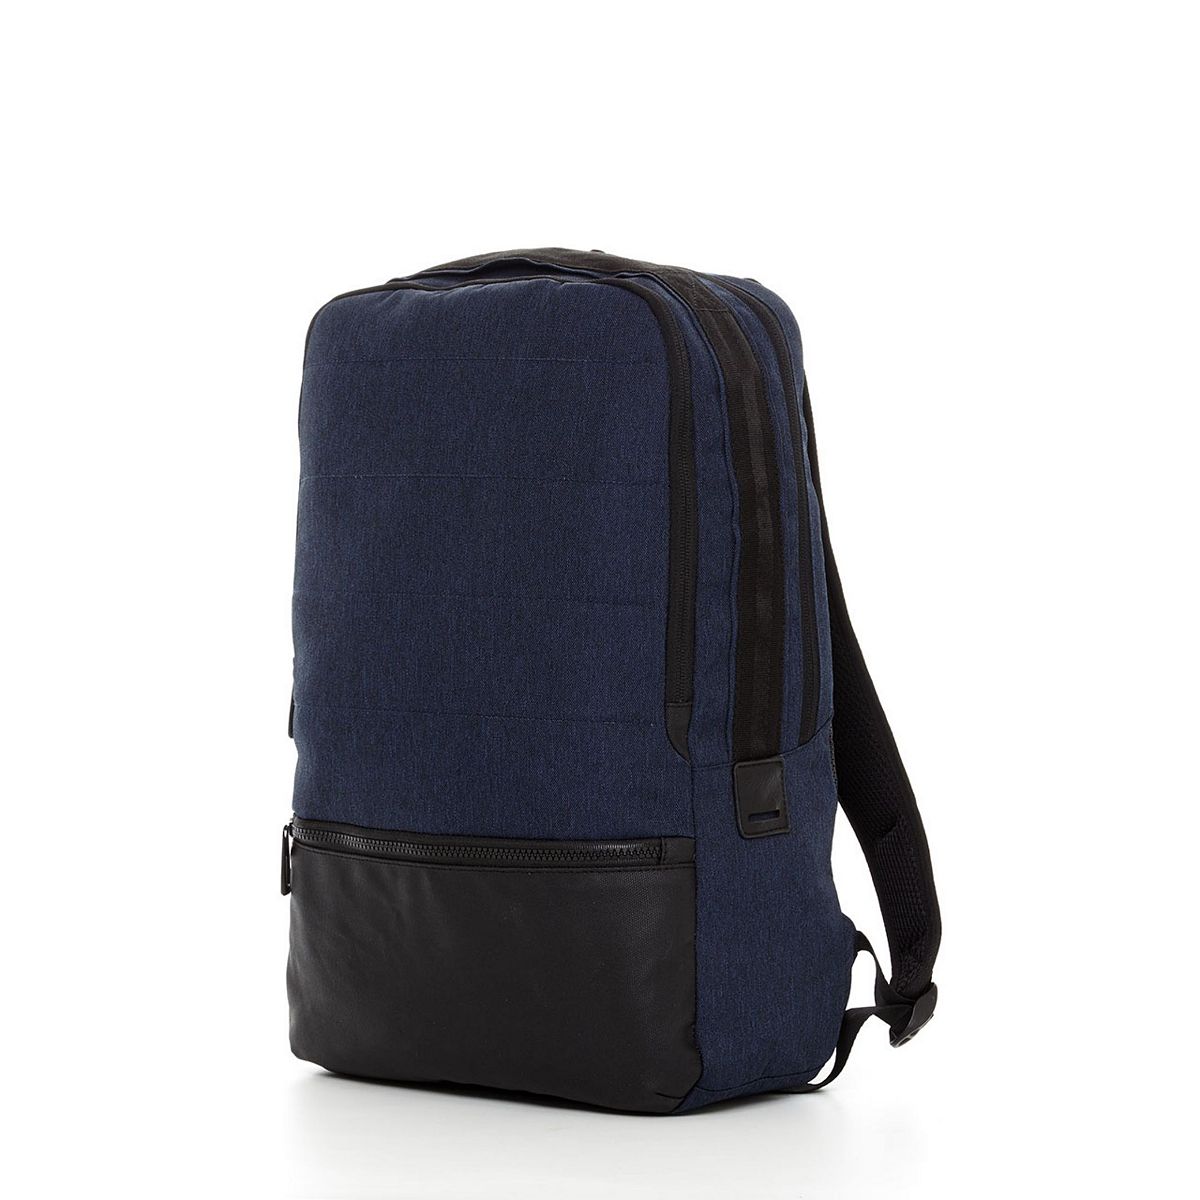 Px Hank Backpack Navy